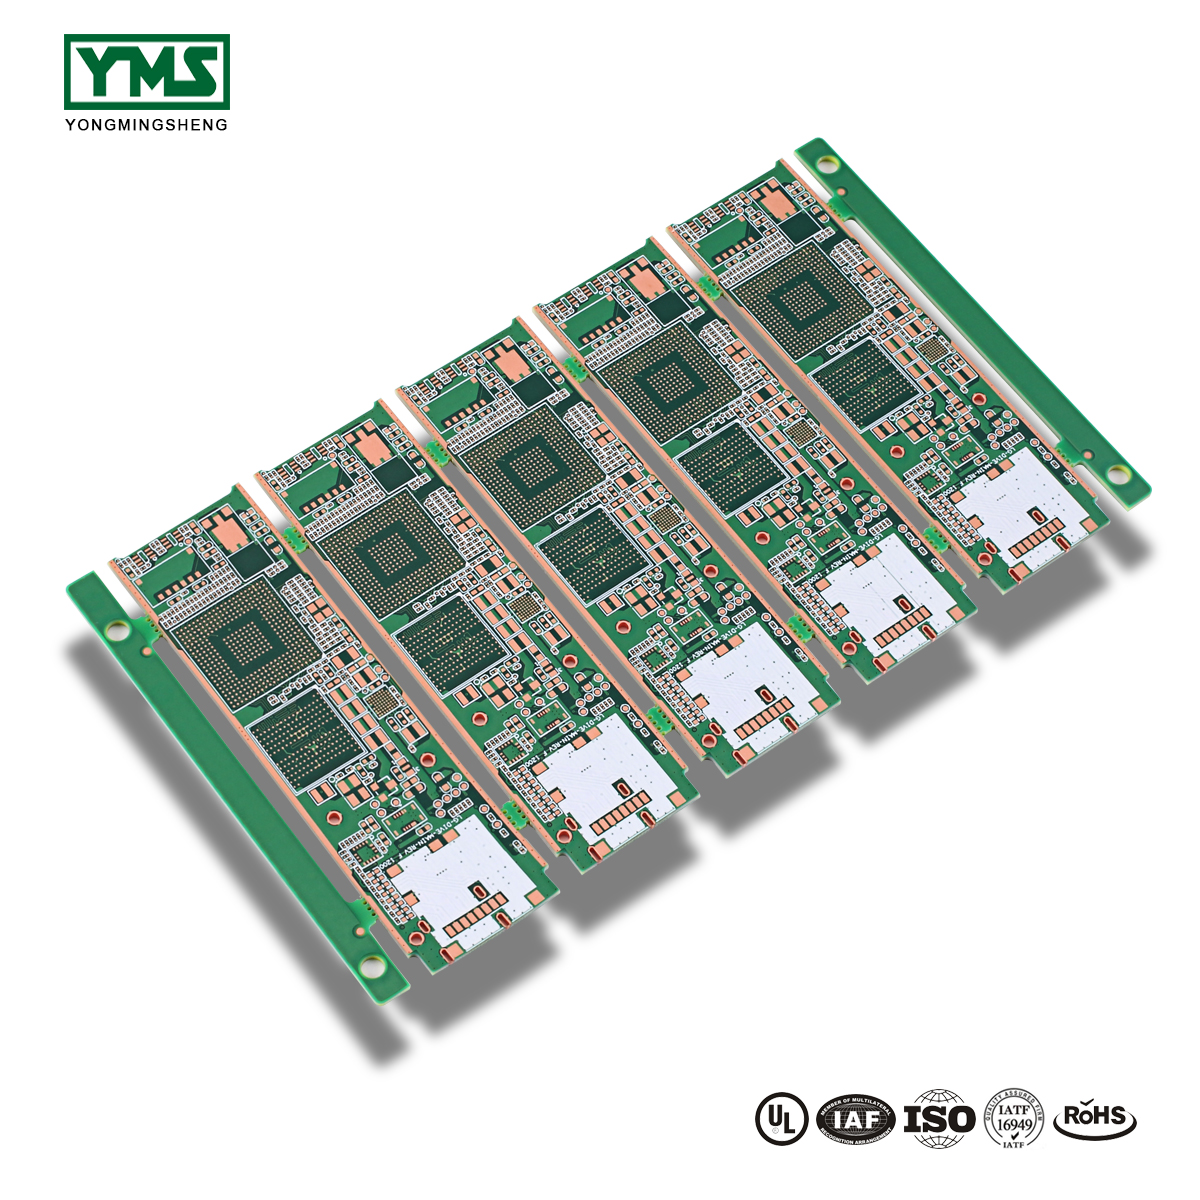 PriceList for Ceramic Pcb - 12Layer Immersion Gold HDI | YMS PCB – Yongmingsheng